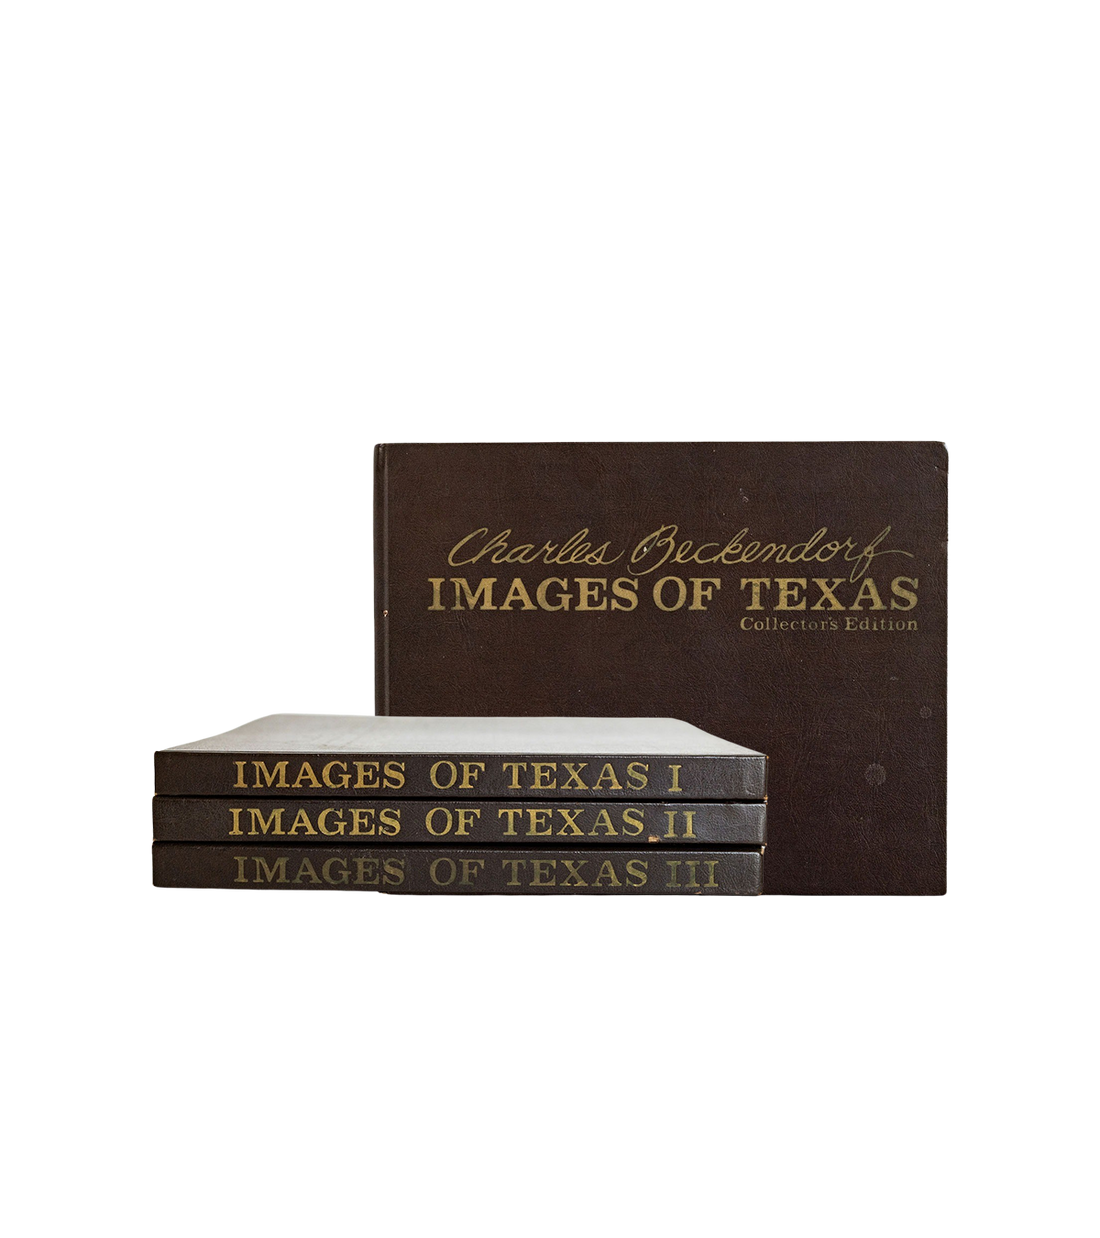 BAMxMC Signed Copy of Images of Texas - 3 Volumes